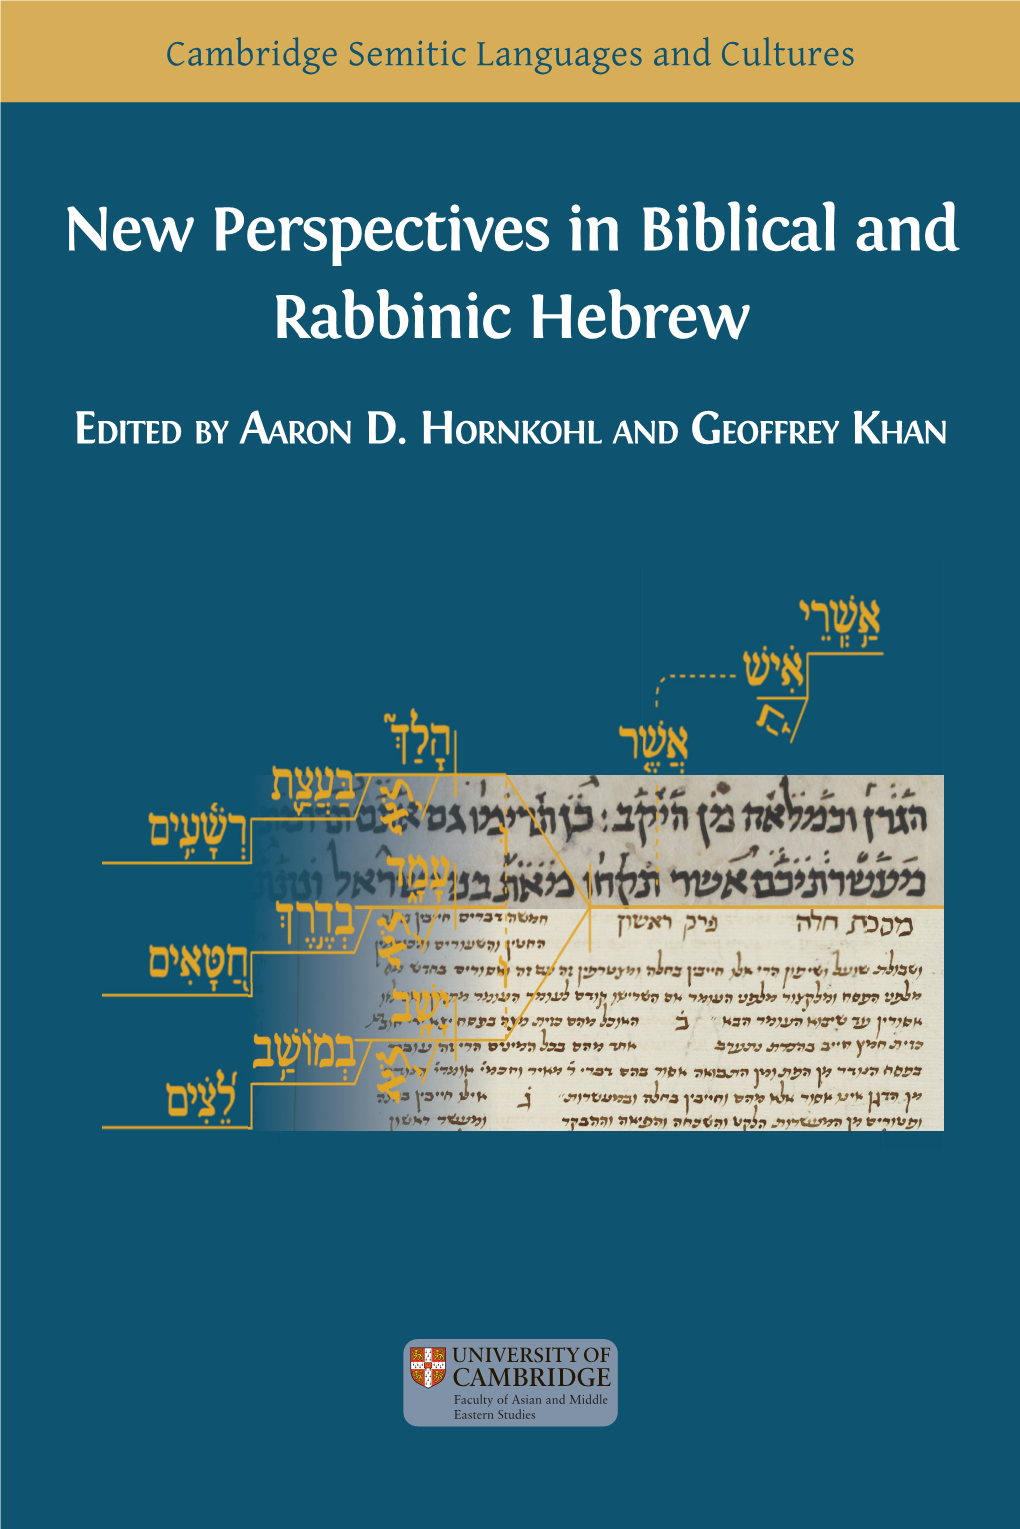 The Alphabetic Revolution, Writing Systems, and Scribal Training in Ancient Israel